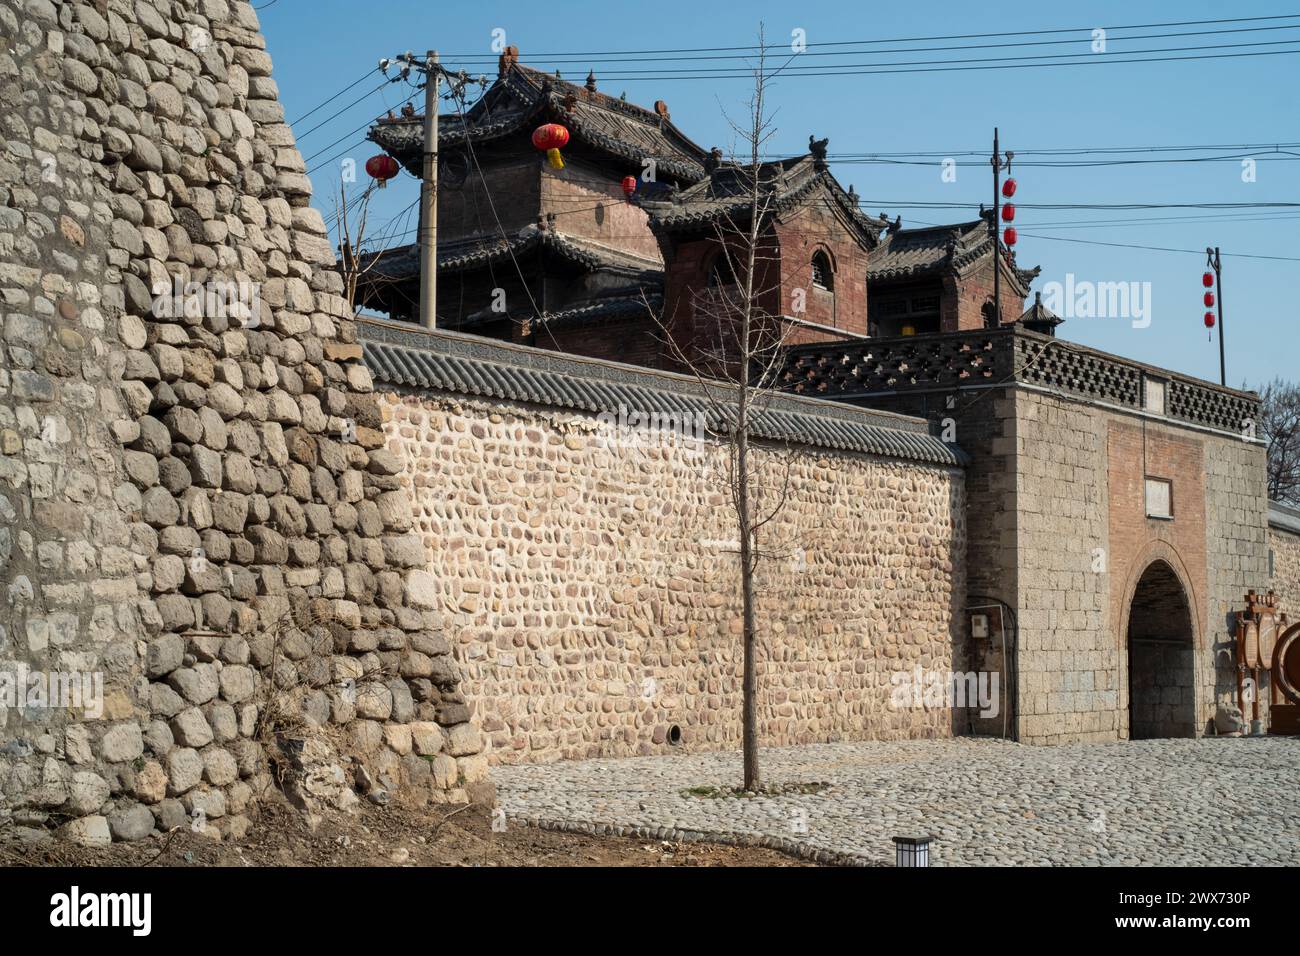 The old city wall of Jingxing, located in Jingxing County, Hebei Province, China, features extensive use of cobblestones for construction. Stock Photo